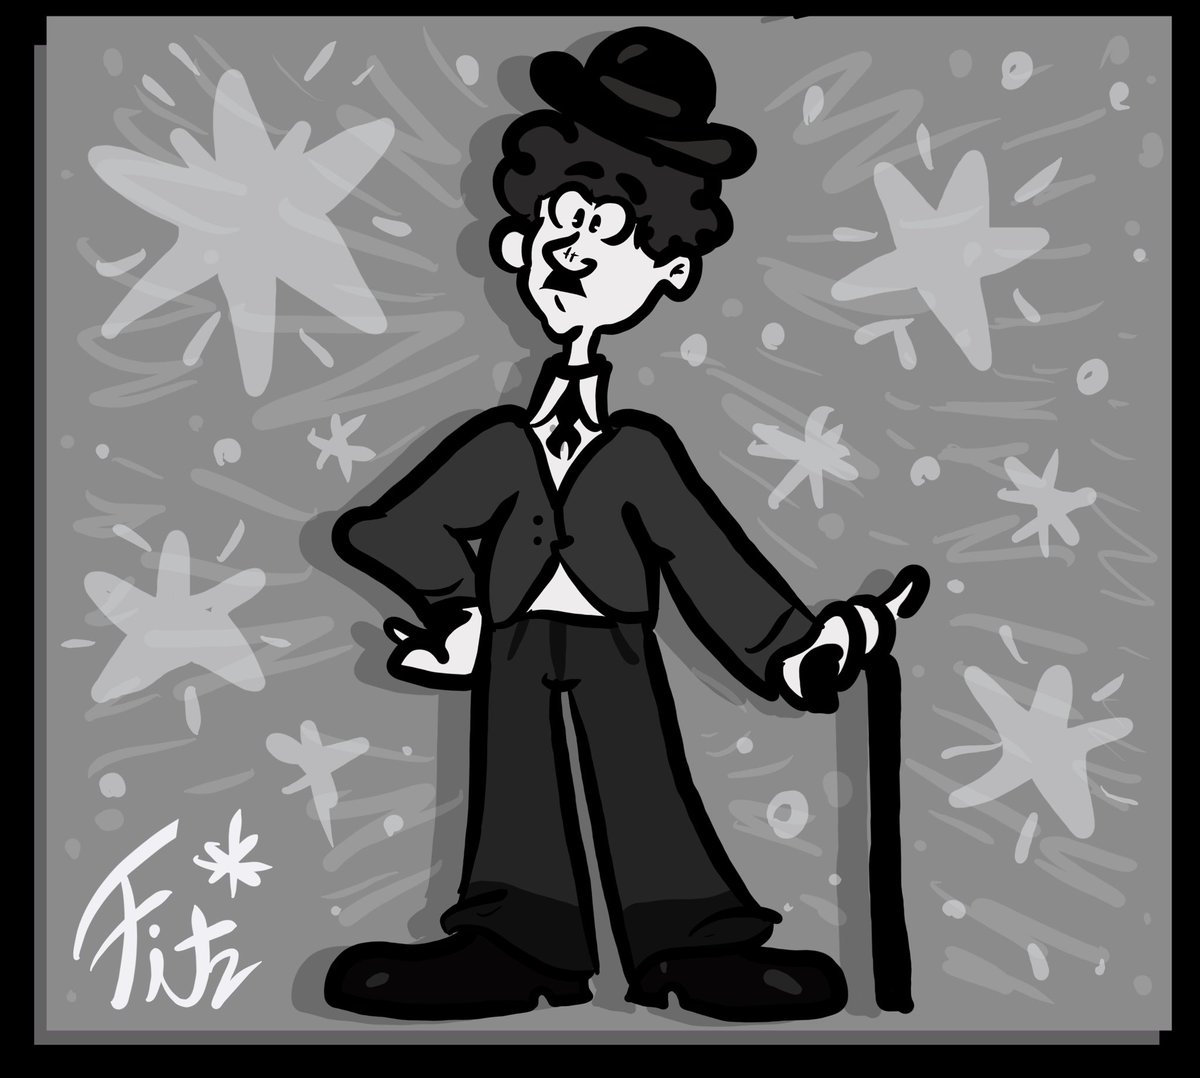 Charlie Chaplin’s birthday is today, so I drew him in his iconic tramp persona to celebrate this day and one of the most influential cinematic storytellers of all time. Enjoy, folks! #CharlieChaplin #silentcinema #silentage #tramp #birthdayart #CharlesChaplin #blackandwhite